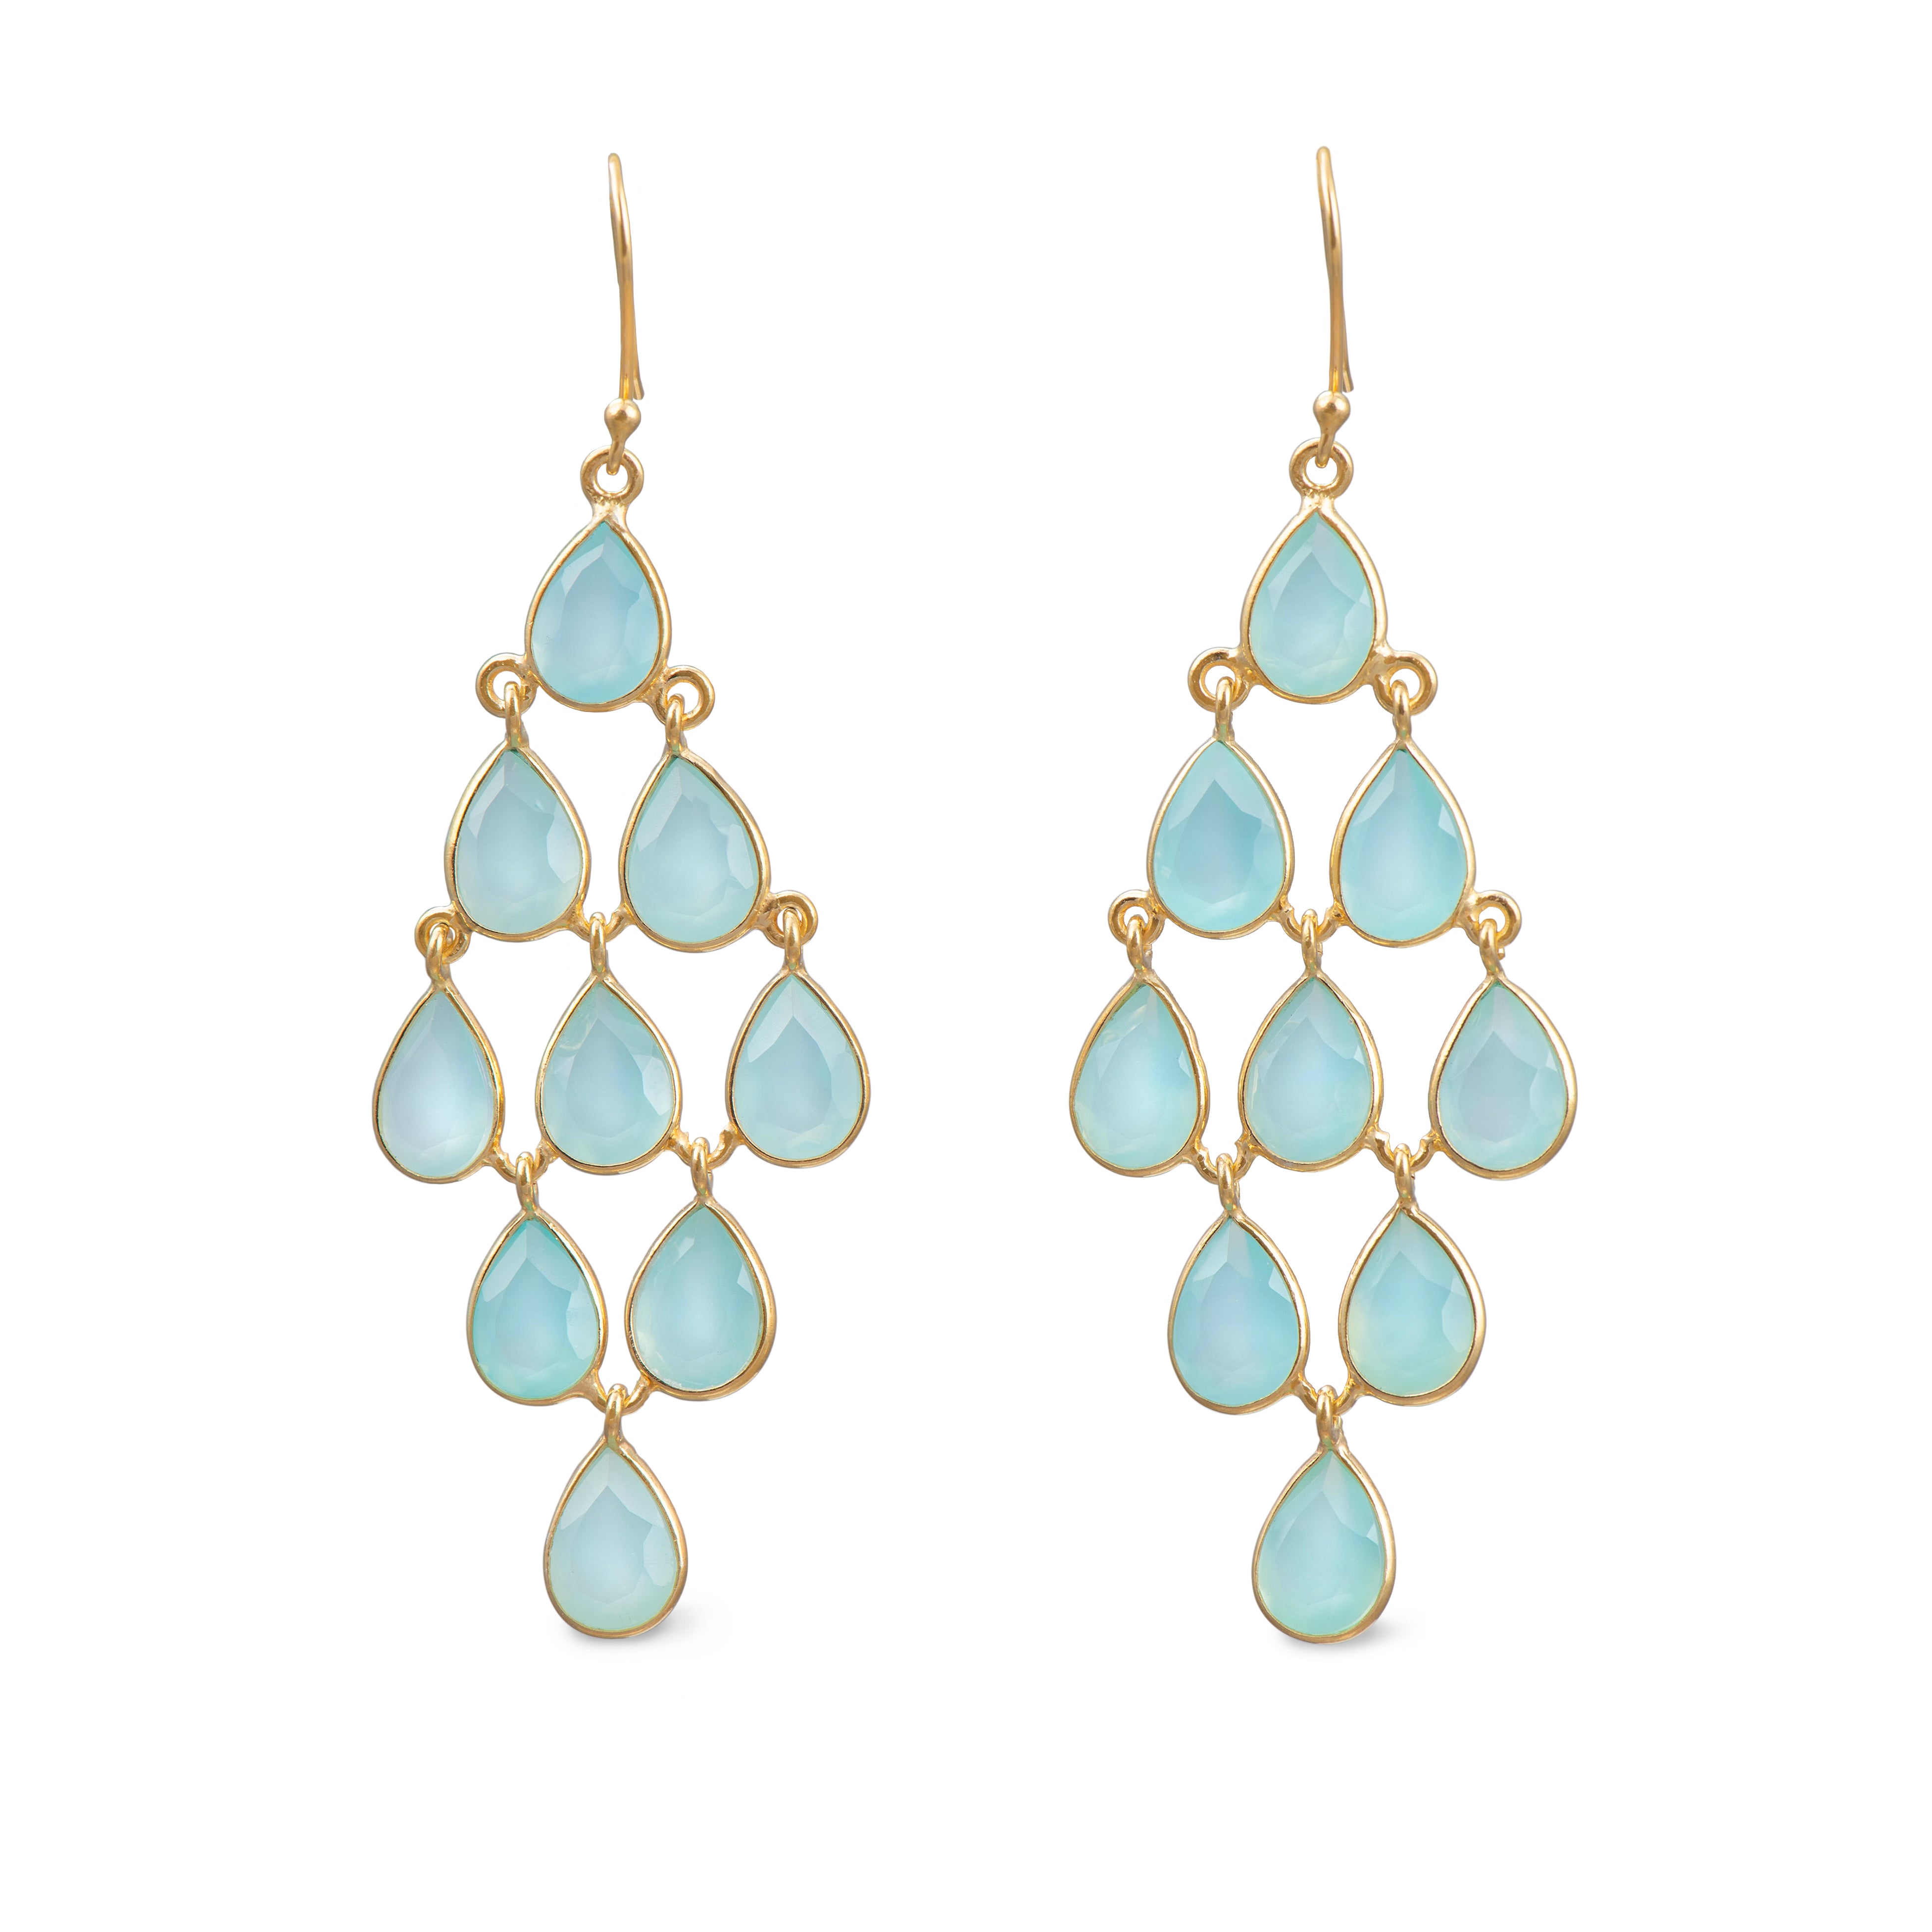 Gold Plated Sterling Silver Chandelier Earrings with Natural Gemstones - Aqua Chalcedony